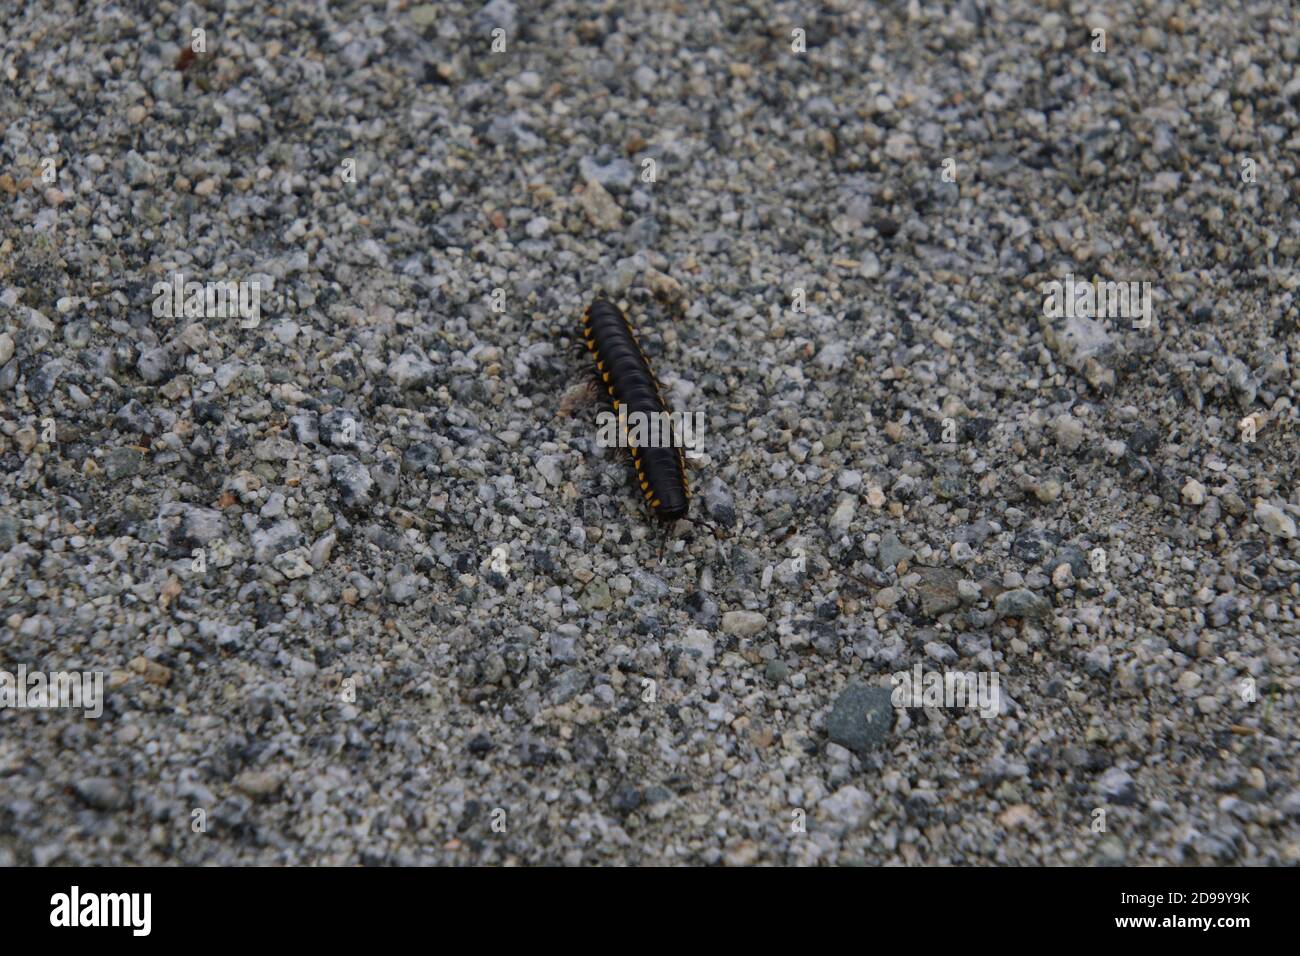 A black and yellow millipede crawling on a fine gravel path on a sunny day Stock Photo